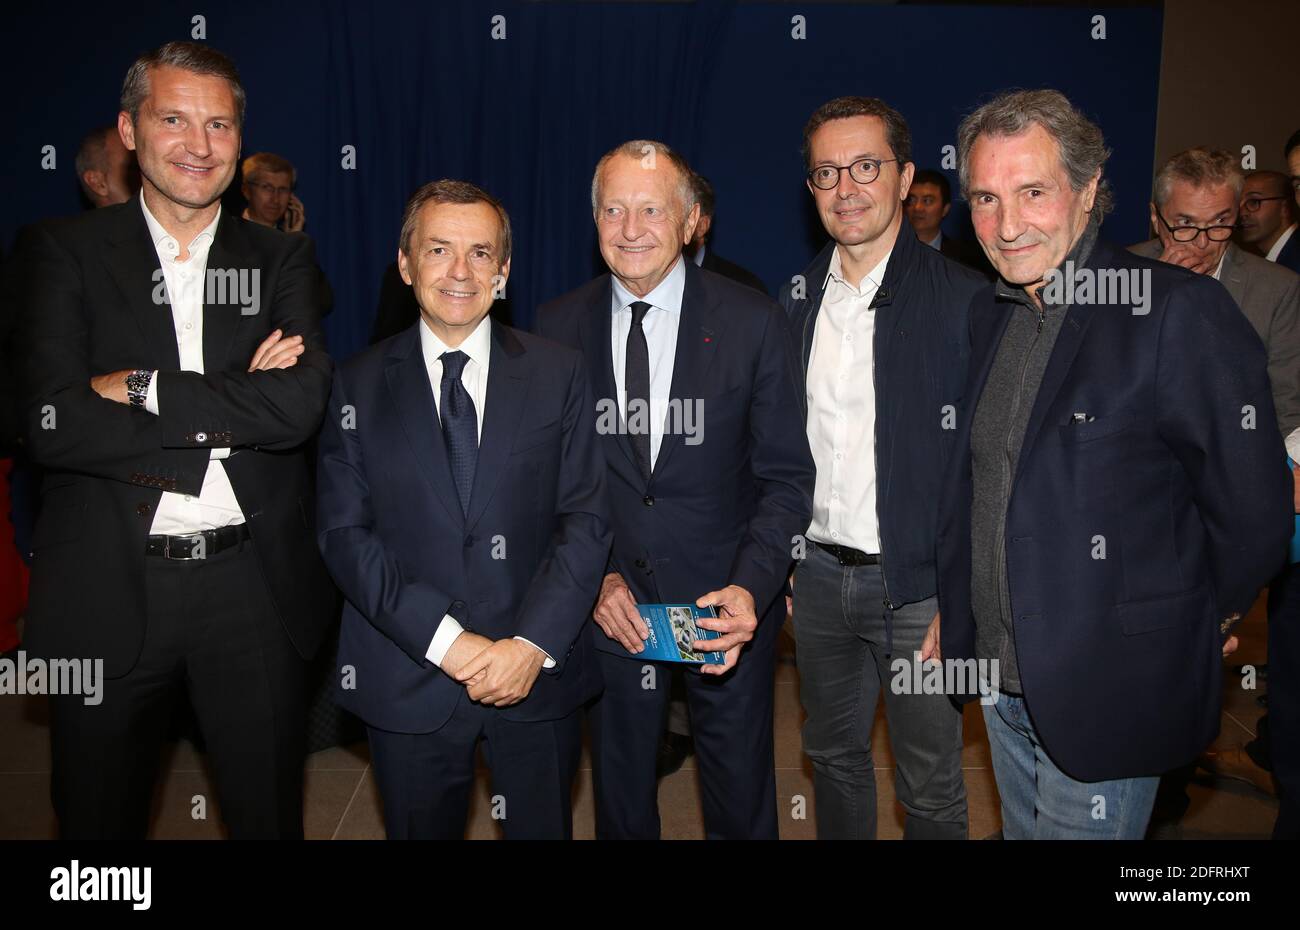 Olivier Letang, Alain Weill, Jean-Michel Aulas, Jacques-Henri Eyraud and  Jean-Jacques Bourdin attending Altice Campus Opening in Paris on October  09, 2018. Photo by Jerome Domine/ABACAPRESS.COM Stock Photo - Alamy